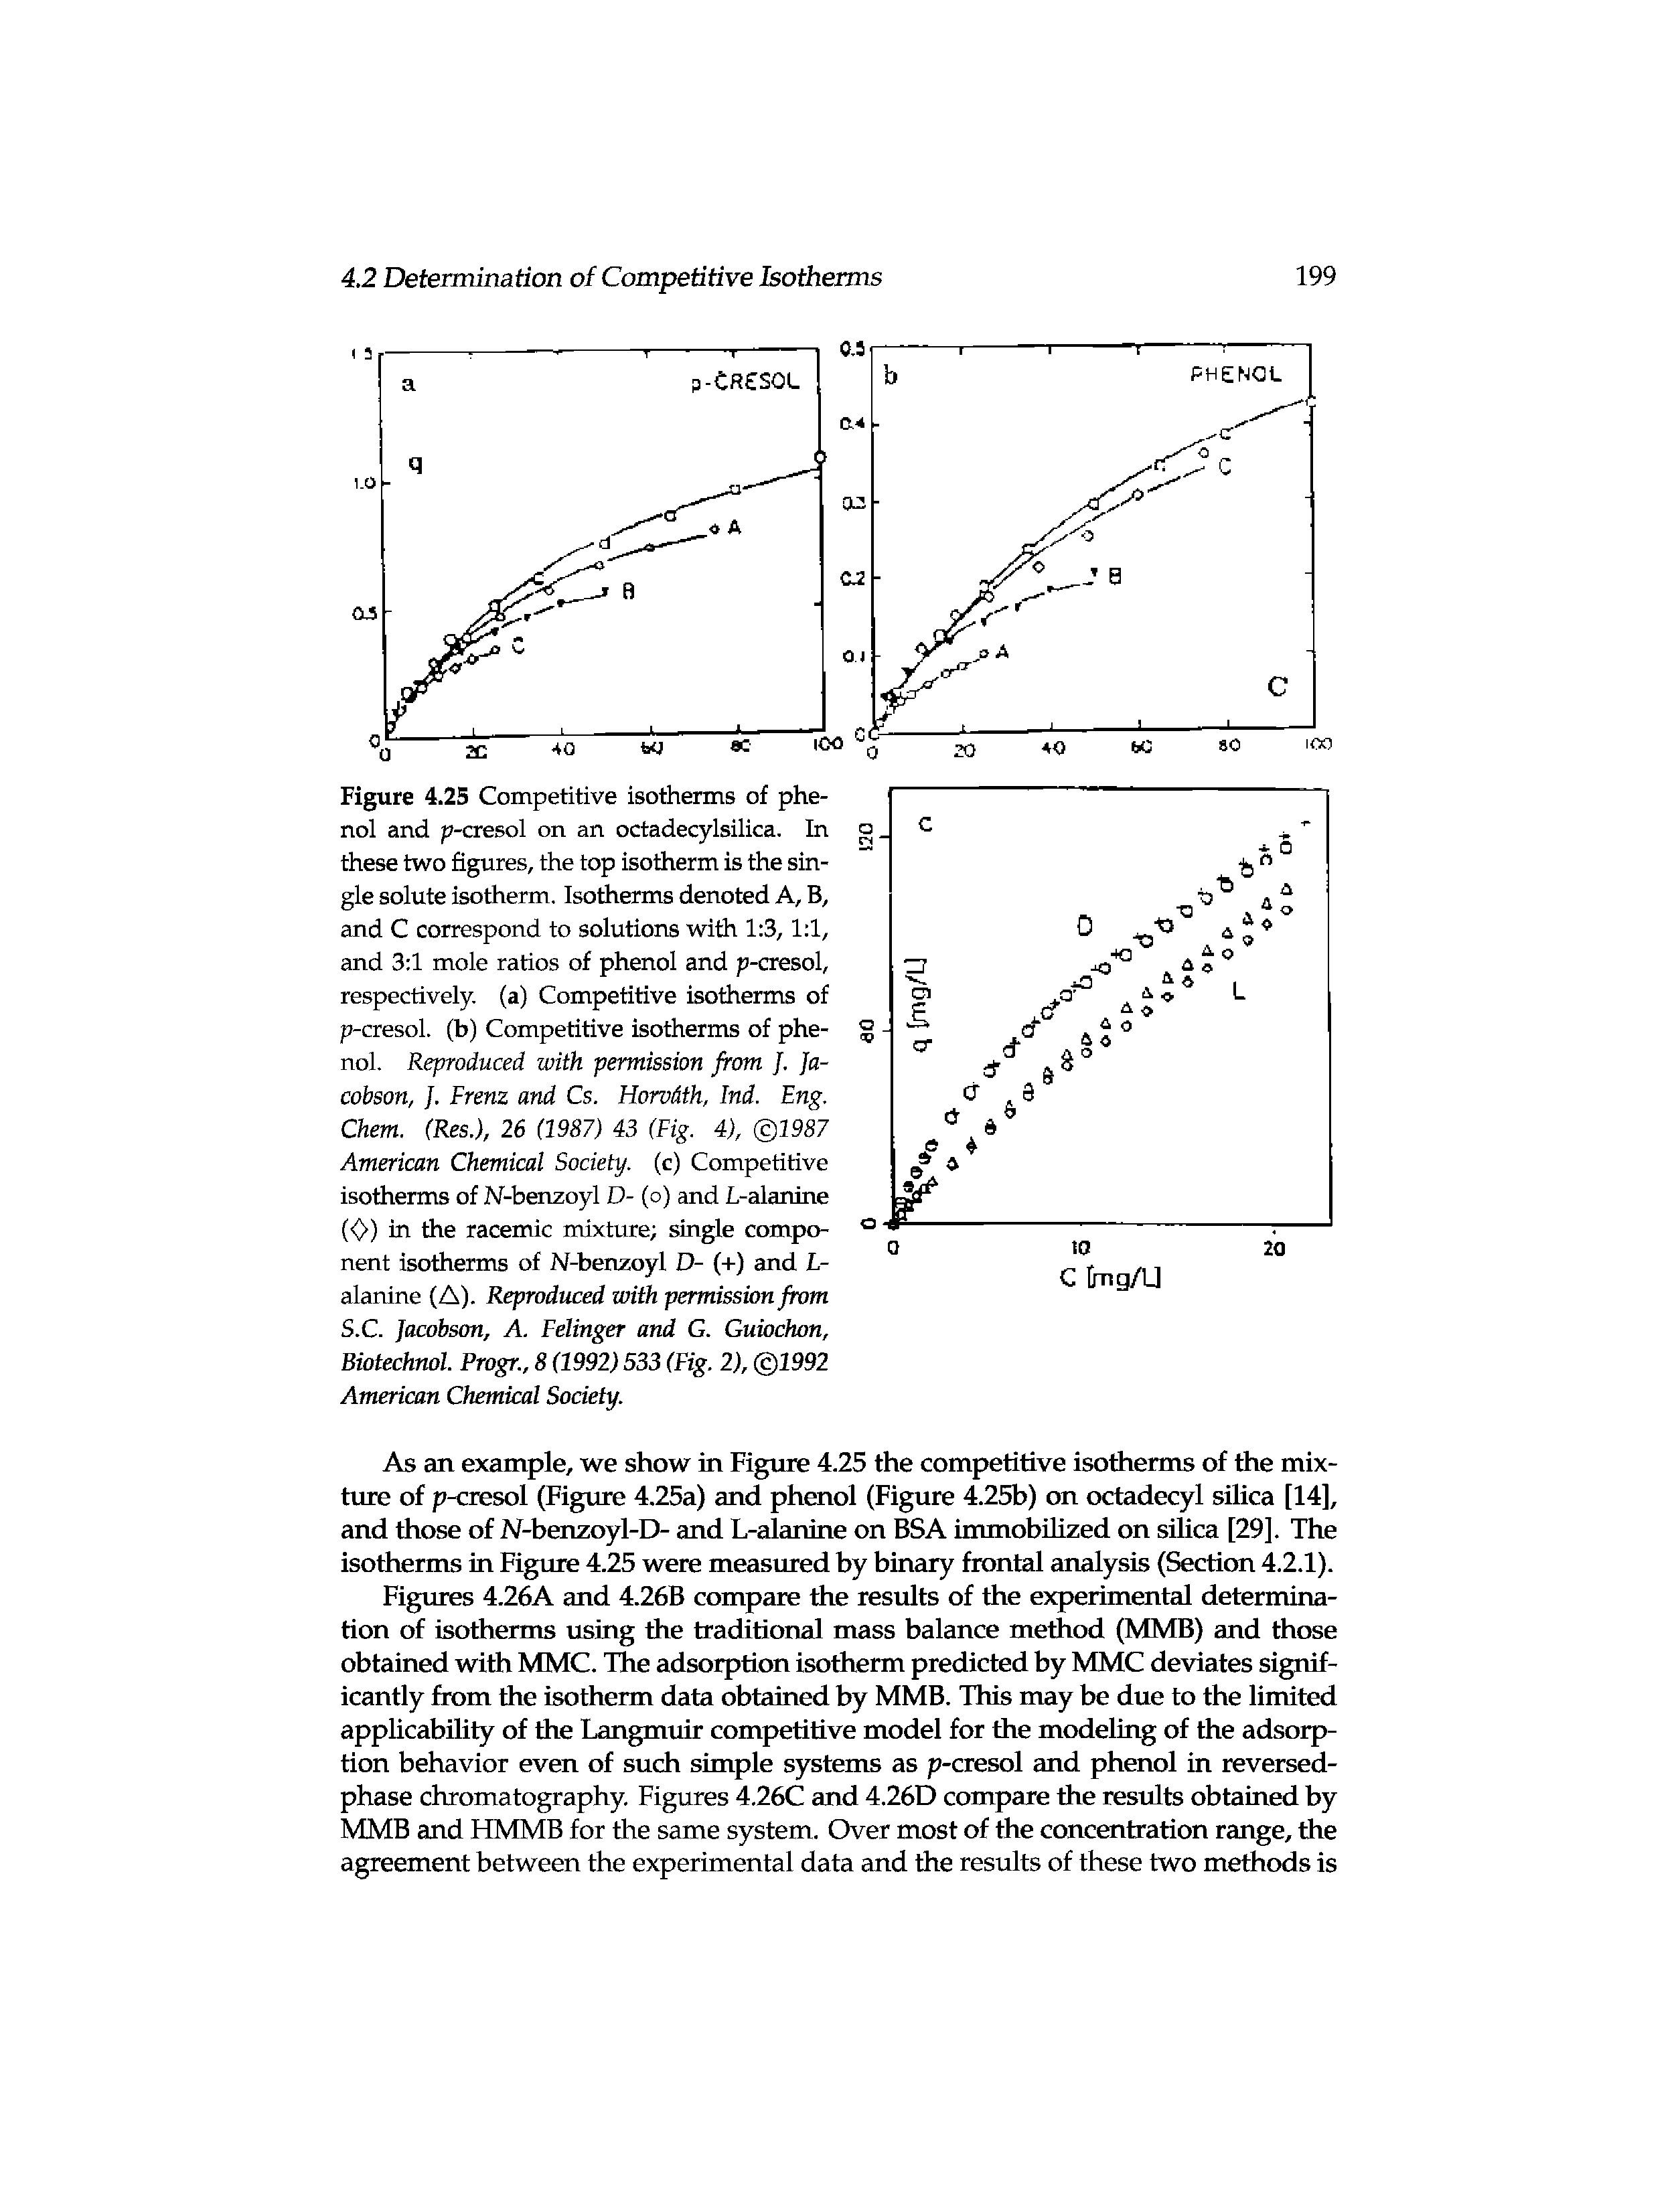 Figures 4.26A and 4.26B compare the results of the experimental determination of isotherms using the traditional mass balance method (MMB) and those obtained with MMC. The adsorption isotherm predicted by MMC deviates significantly from the isotherm data obtained by MMB. This may be due to the limited applicability of the Langmuir competitive model for the modeling of the adsorption behavior even of such simple systems as p-cresol and phenol in reversed-phase chromatography. Figures 4.26C and 4.26D compare the results obtained by MMB and HMMB for the same system. Over most of the concentration range, the agreement between the experimental data and the results of these two methods is...